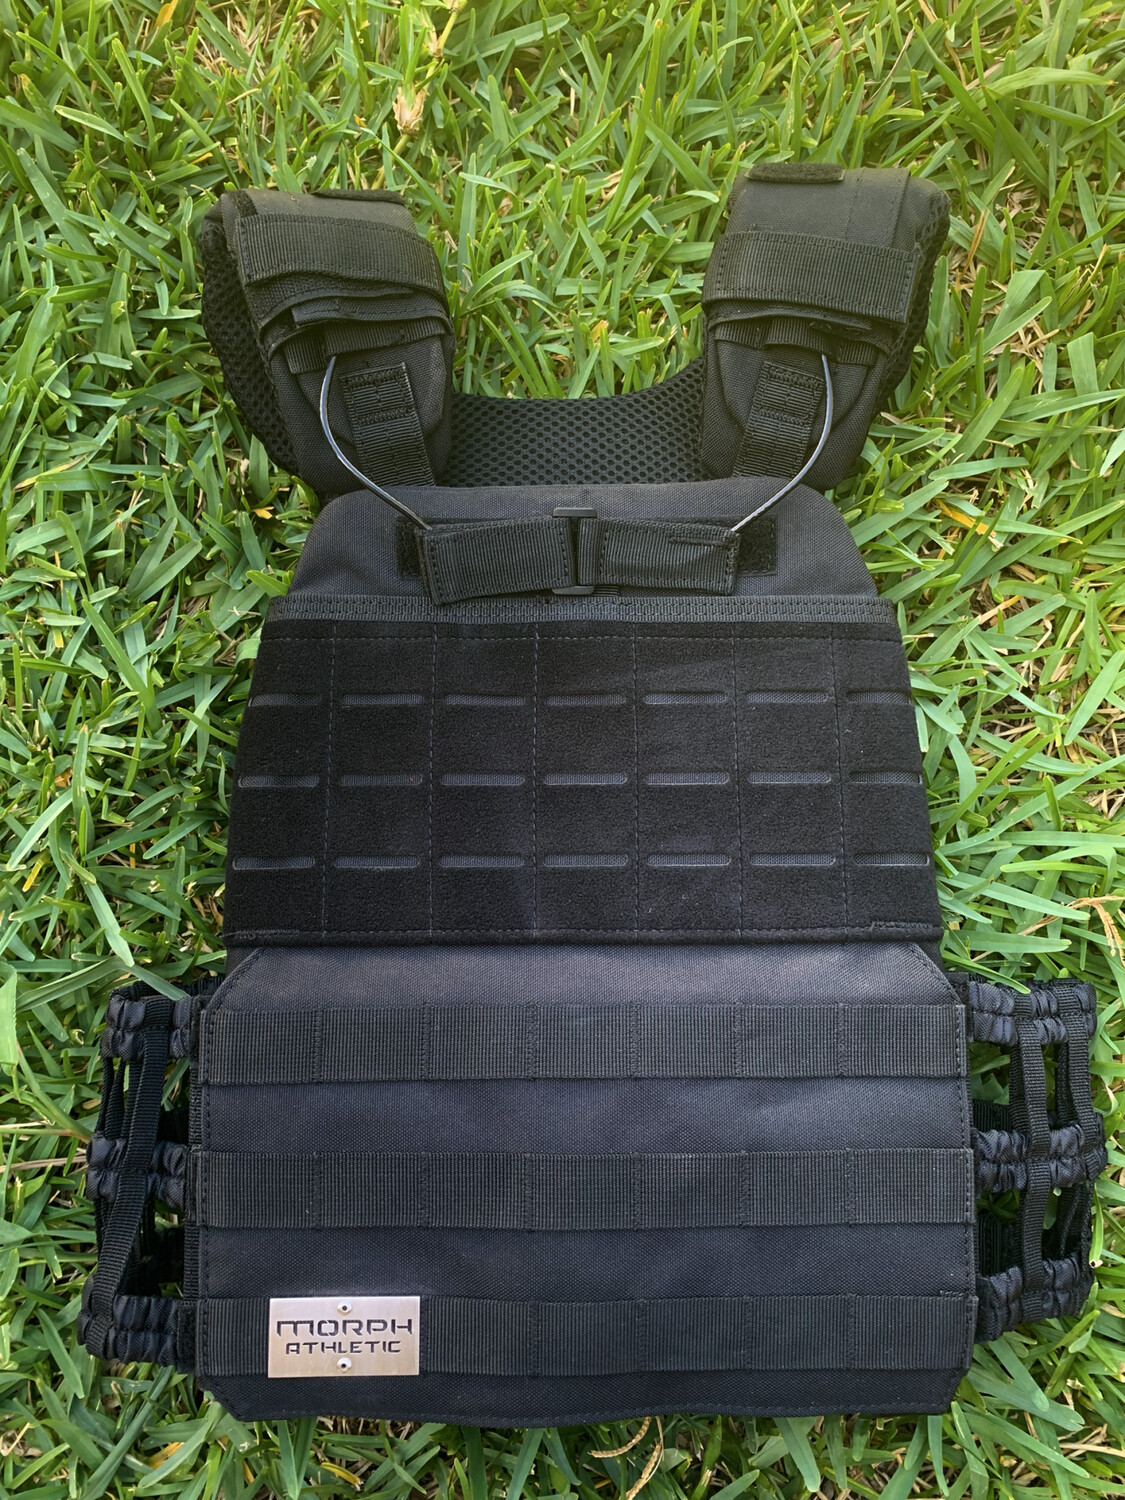 20lbs Black Slim Fit Plate Carrier Vest (plates included)